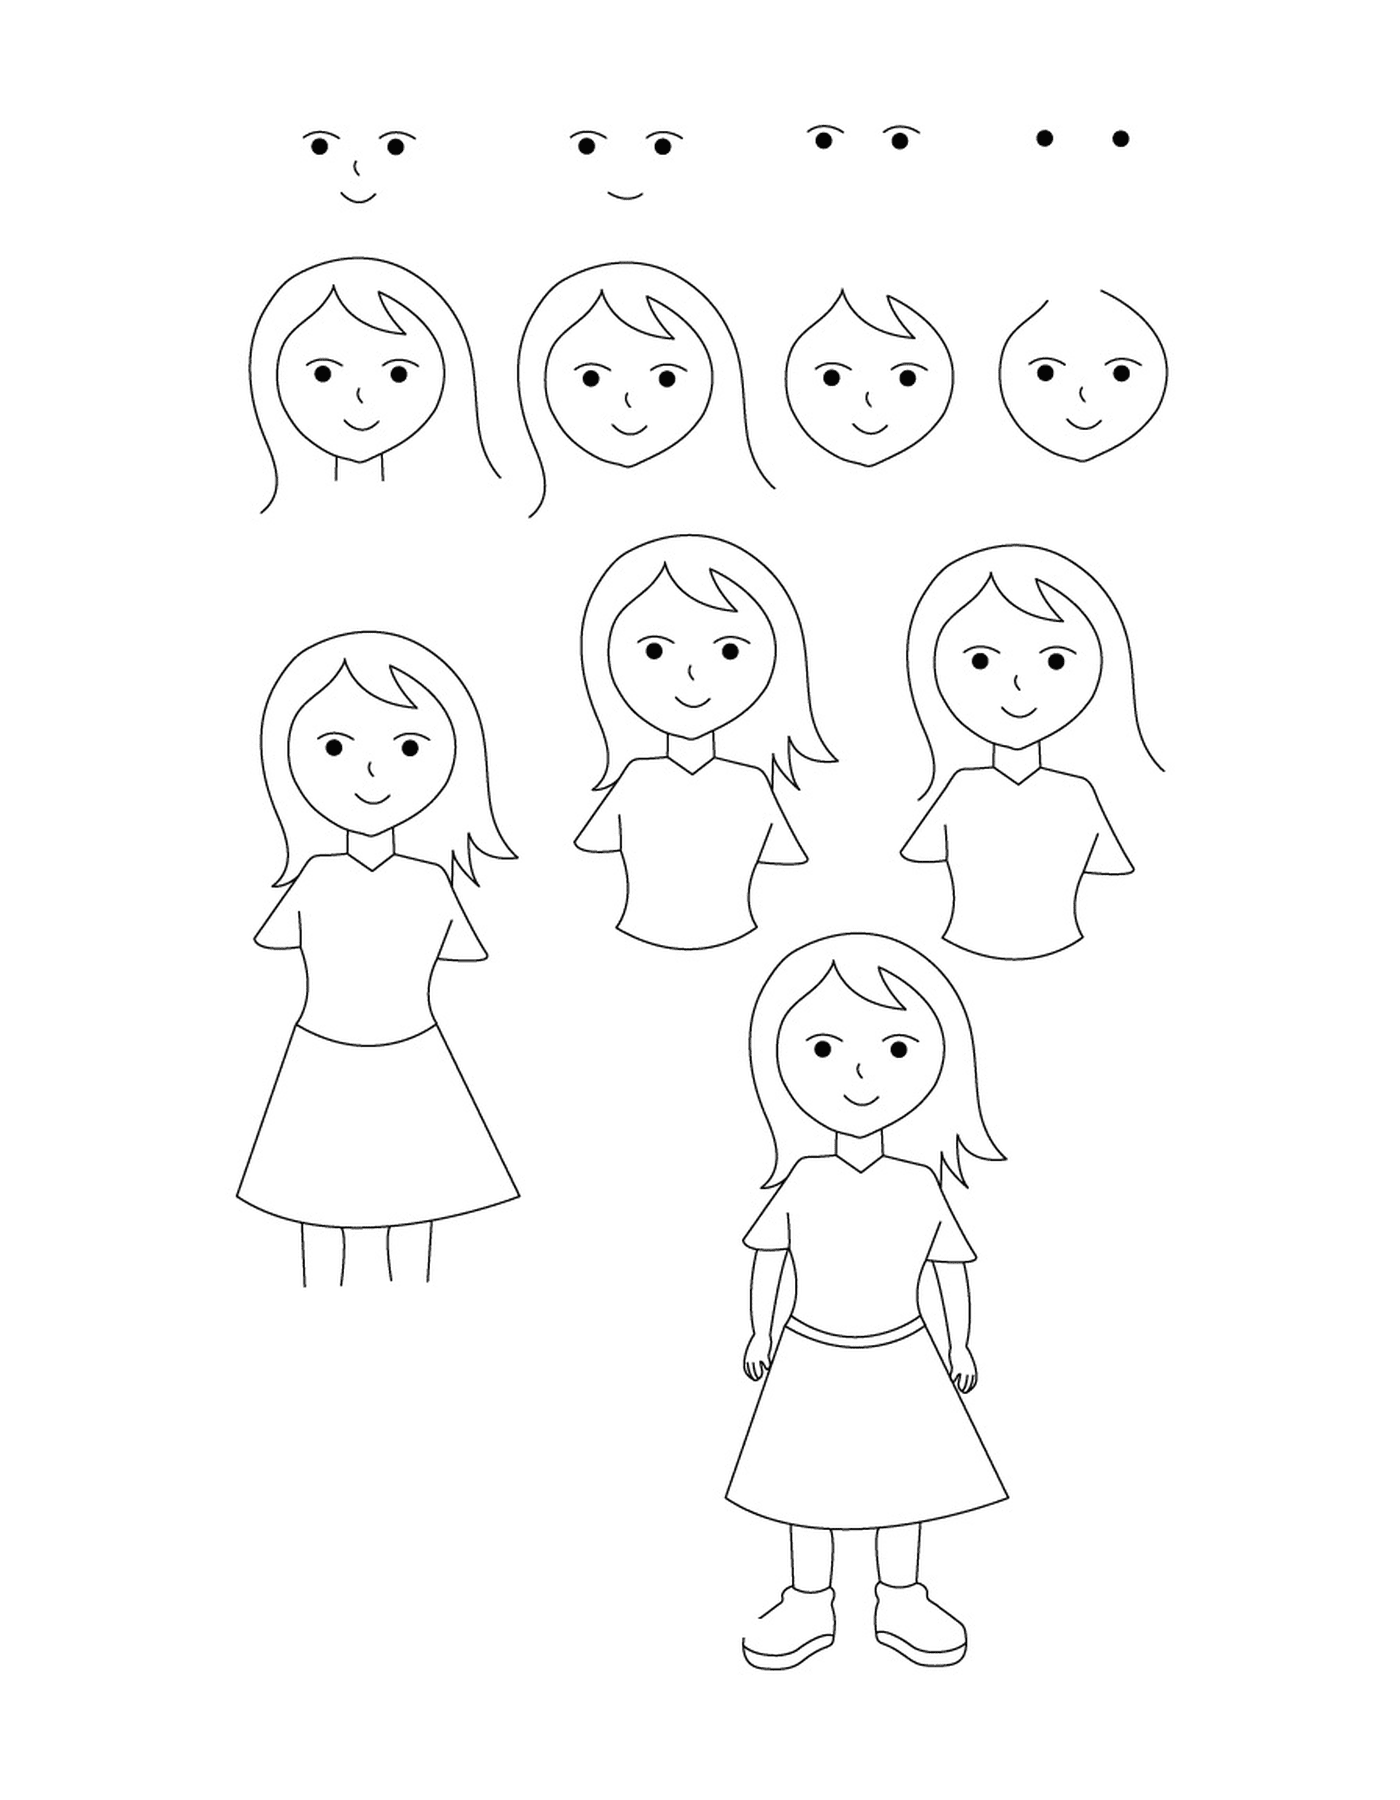  How to draw a girl 